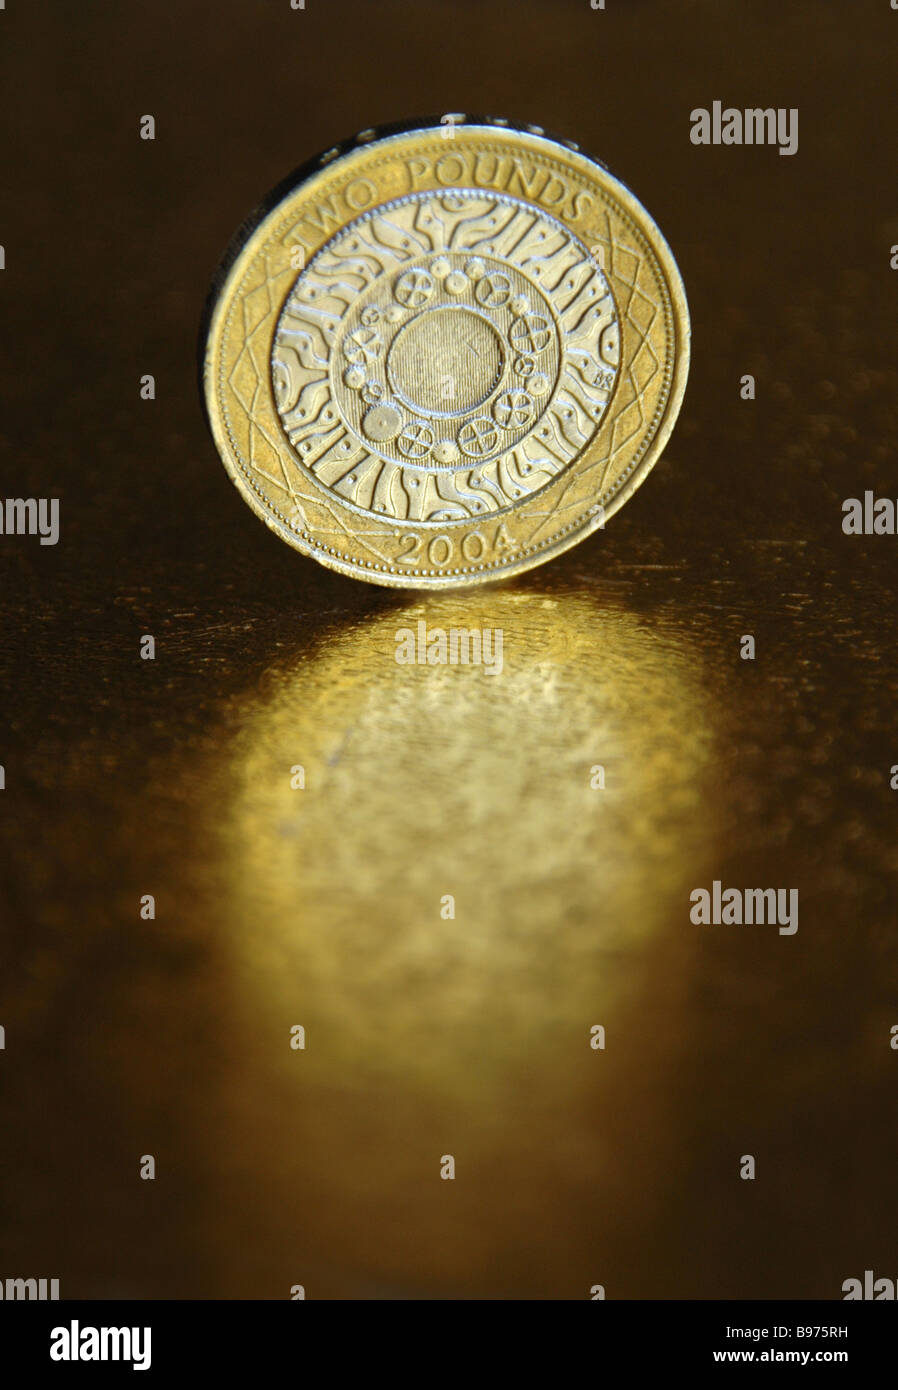 A standing 2 pound coin and its reflection. Stock Photo